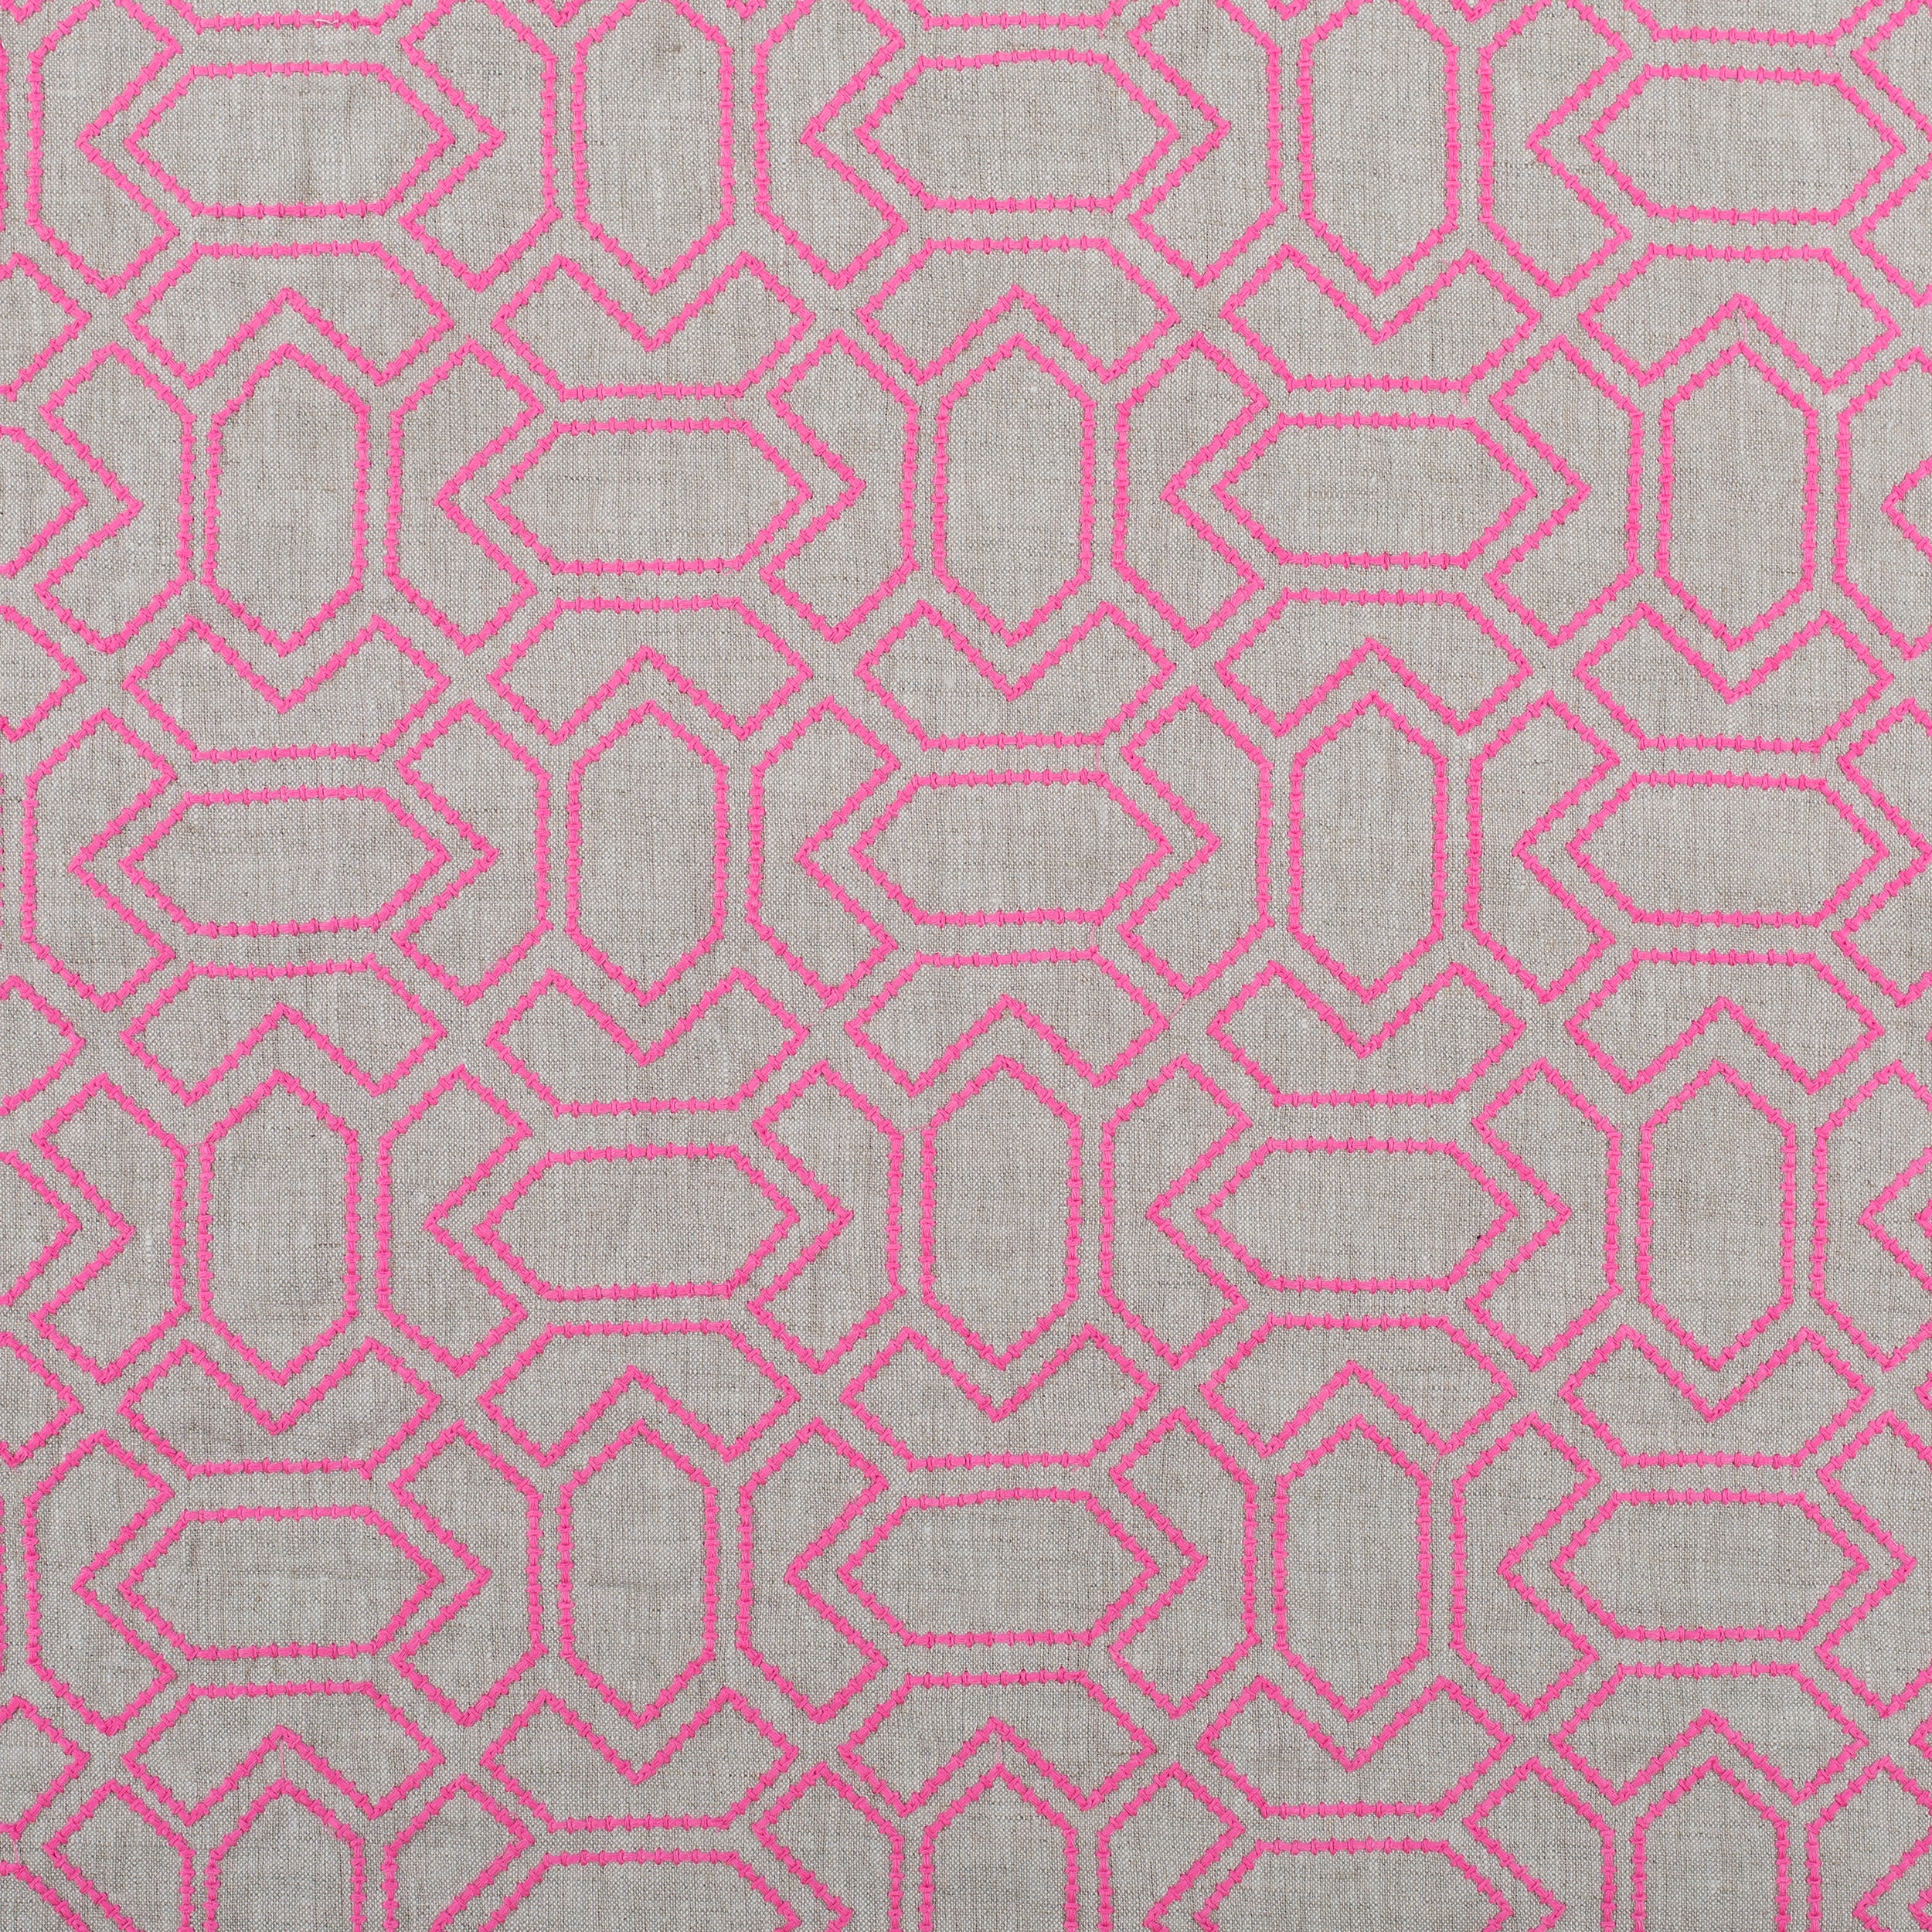 Fabric with an embroidered geometric grid print in pink on a gray field.